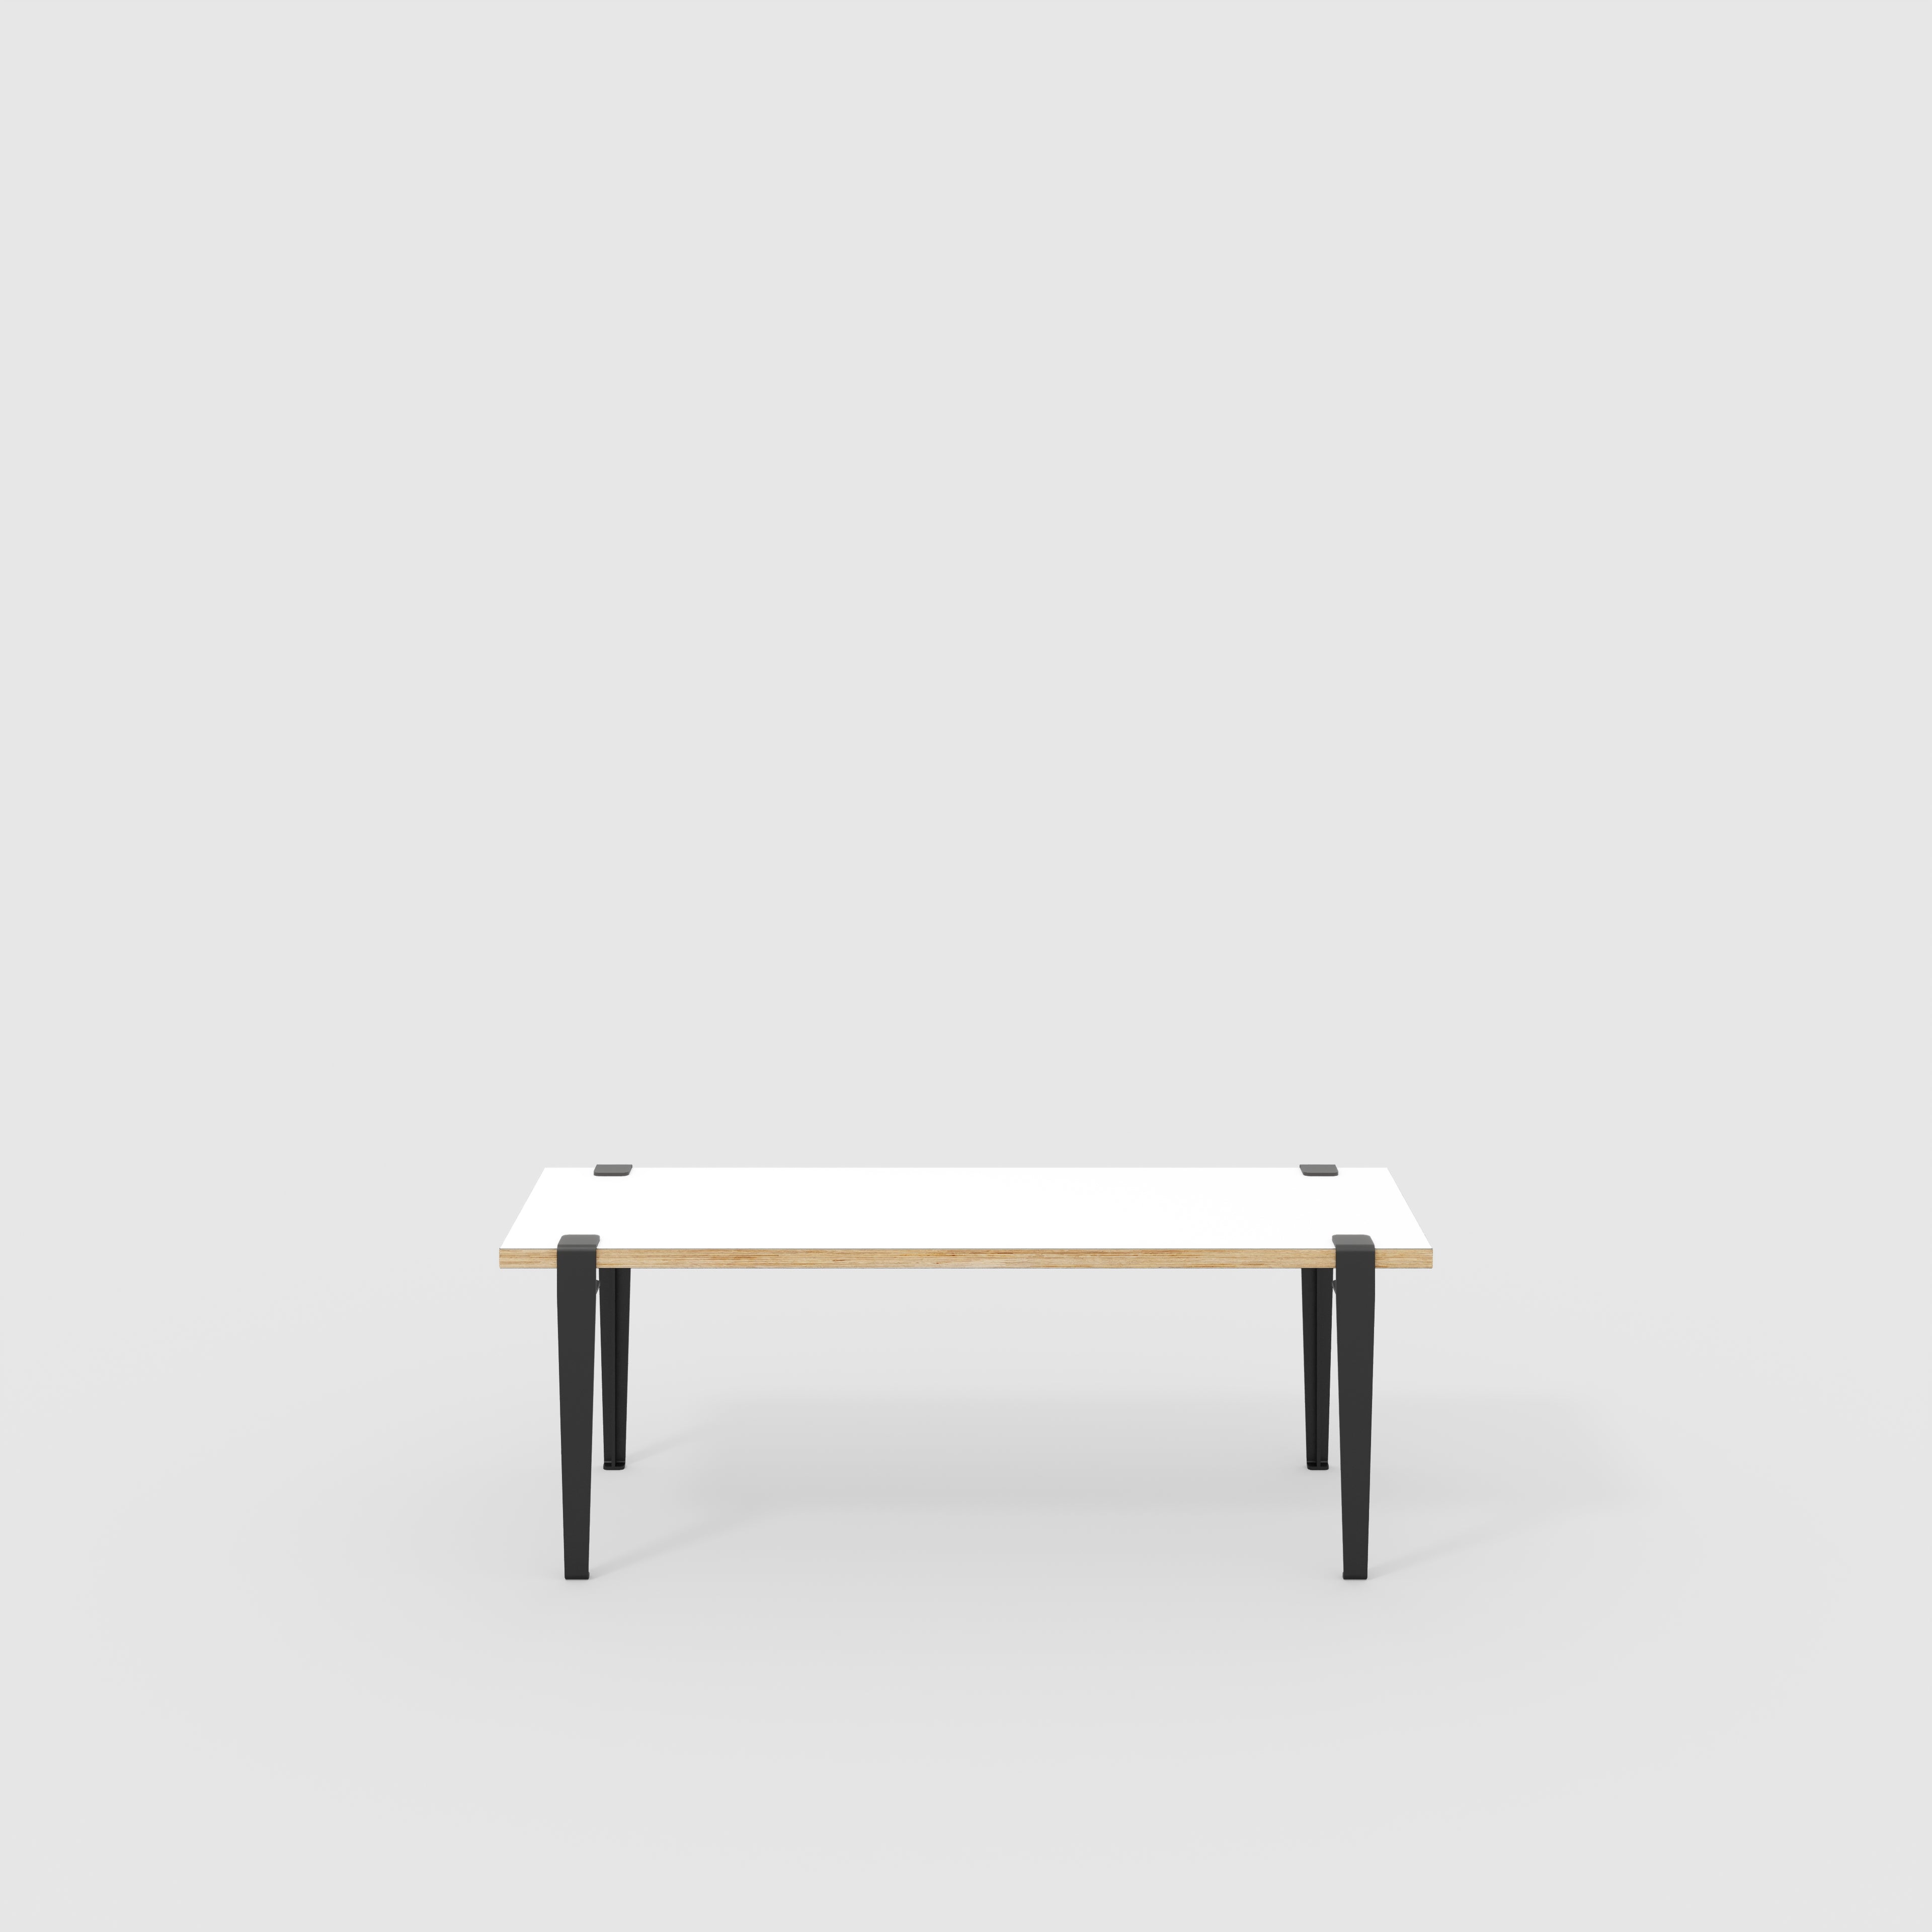 Bench Seat with Black Tiptoe Legs - Formica White - 1200(w) x 400(d) x 450(h)